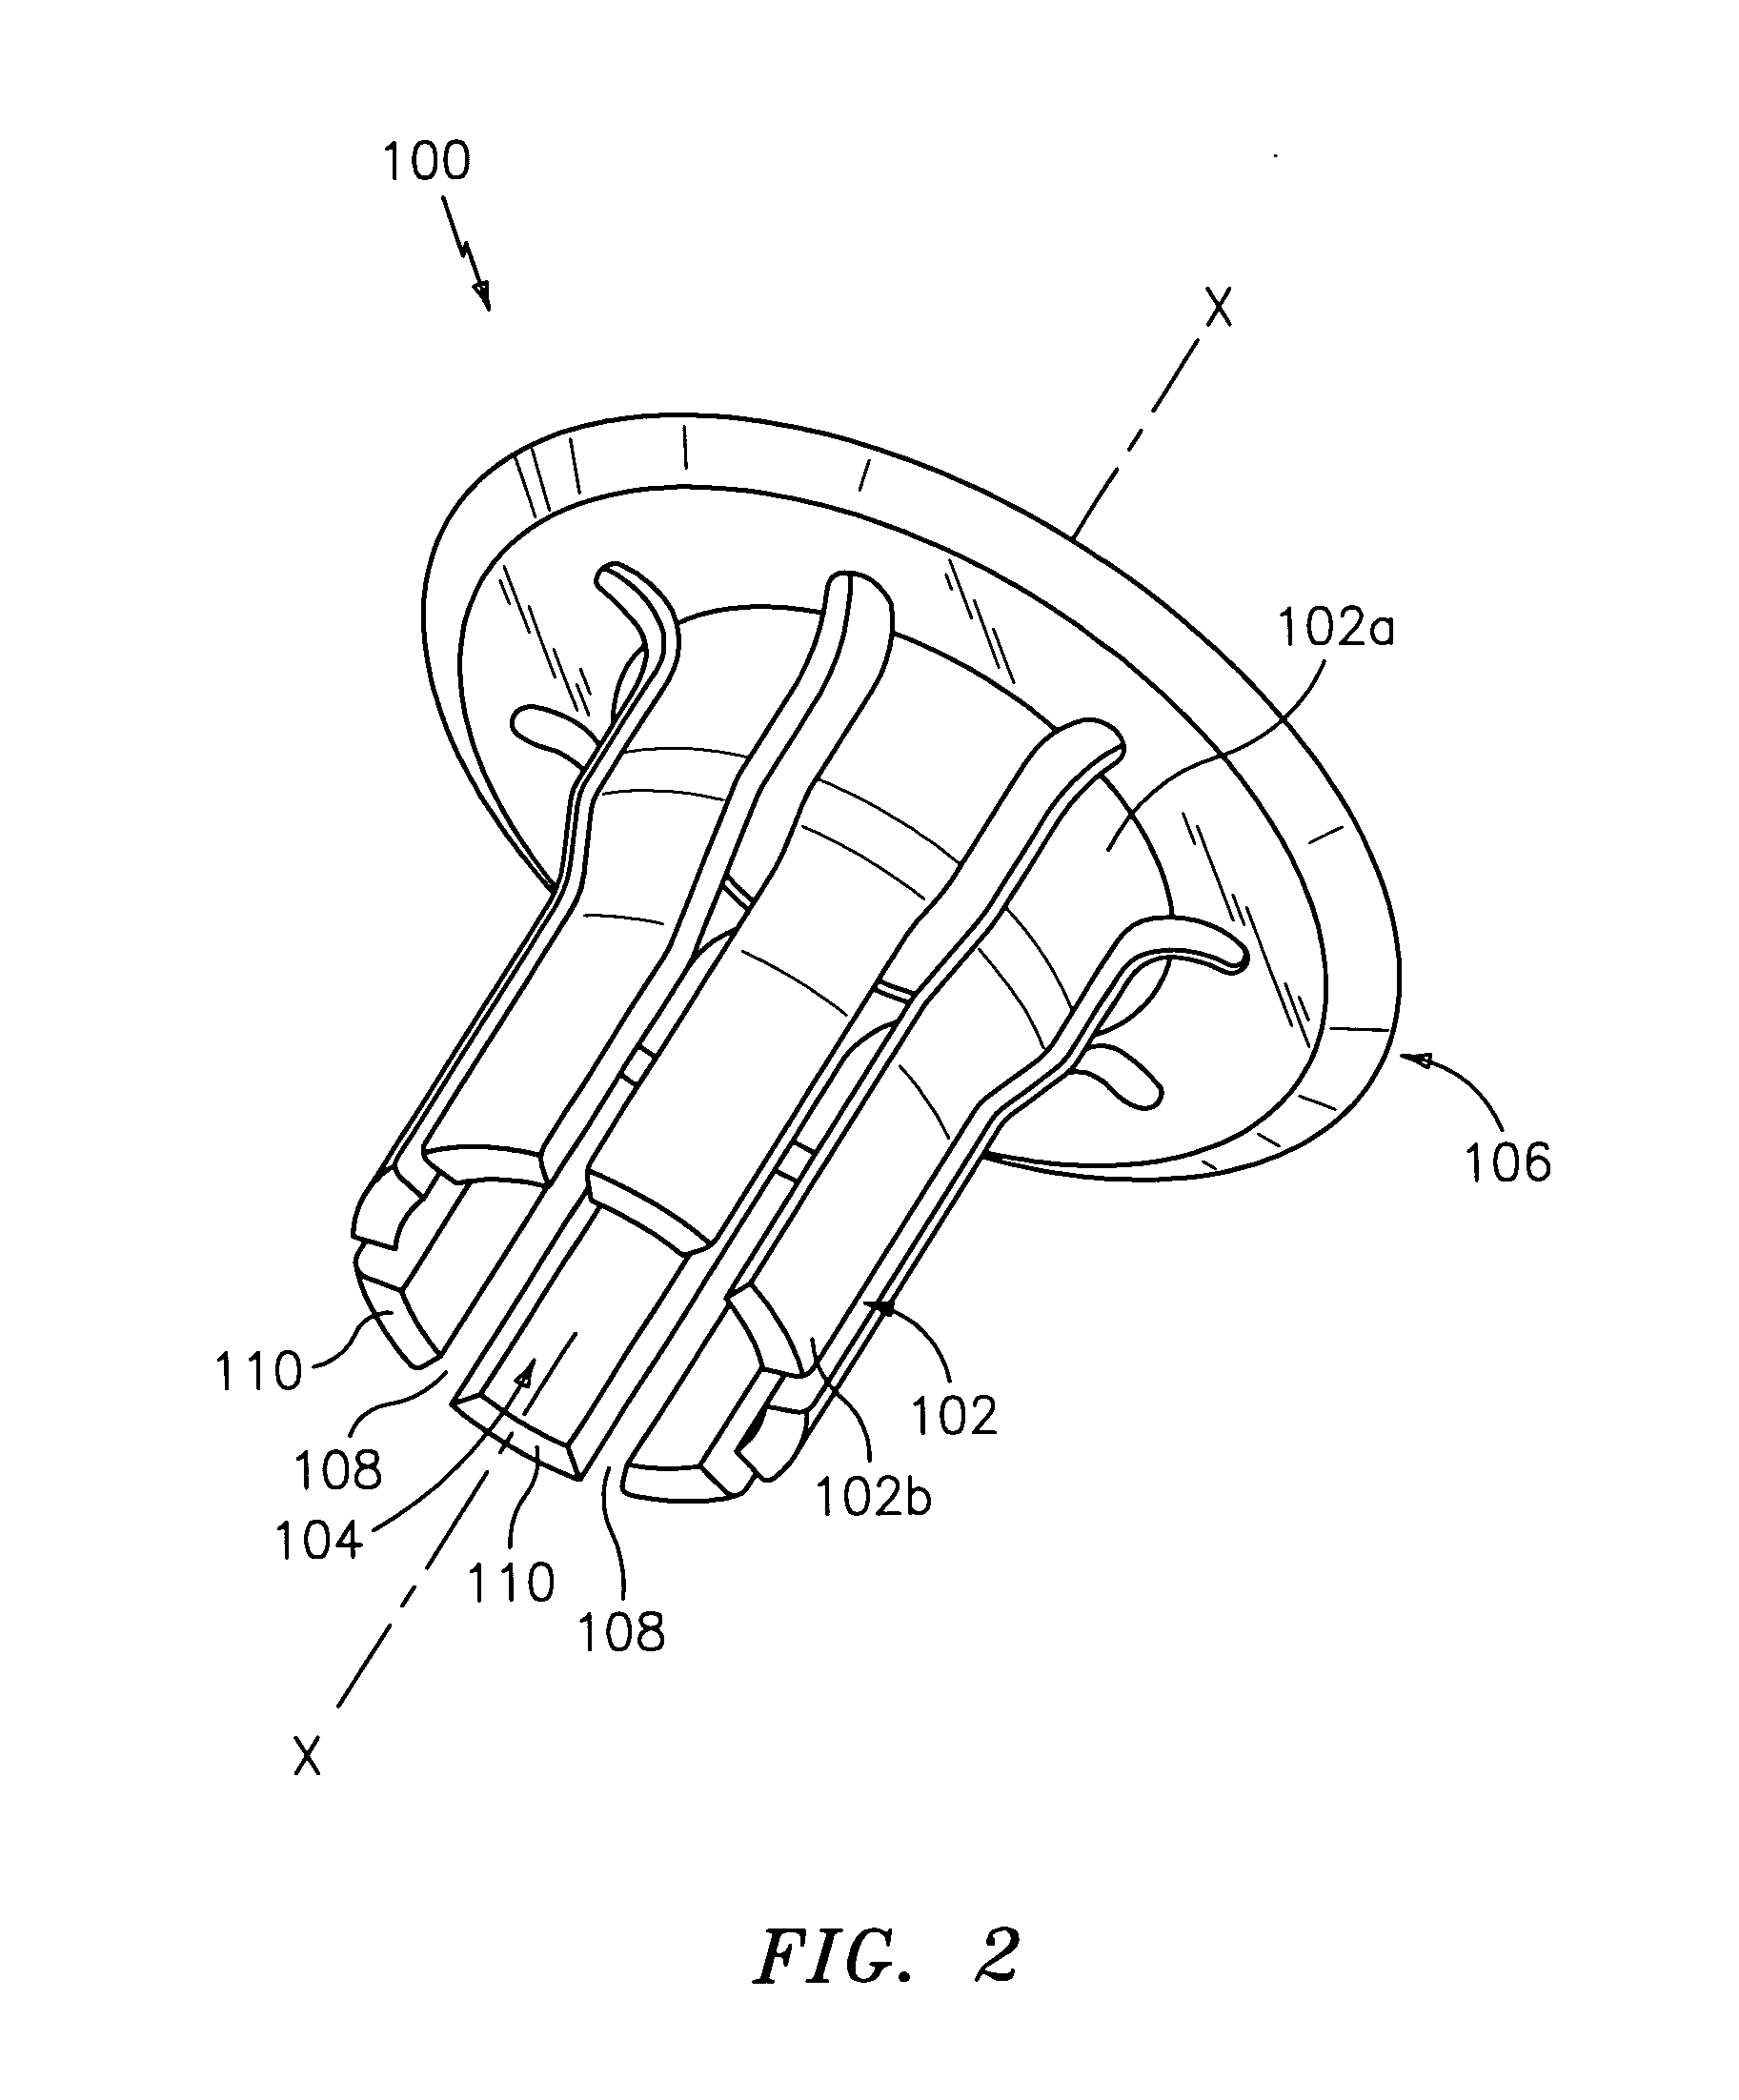 Hub for positioning annular structure on a surgical device